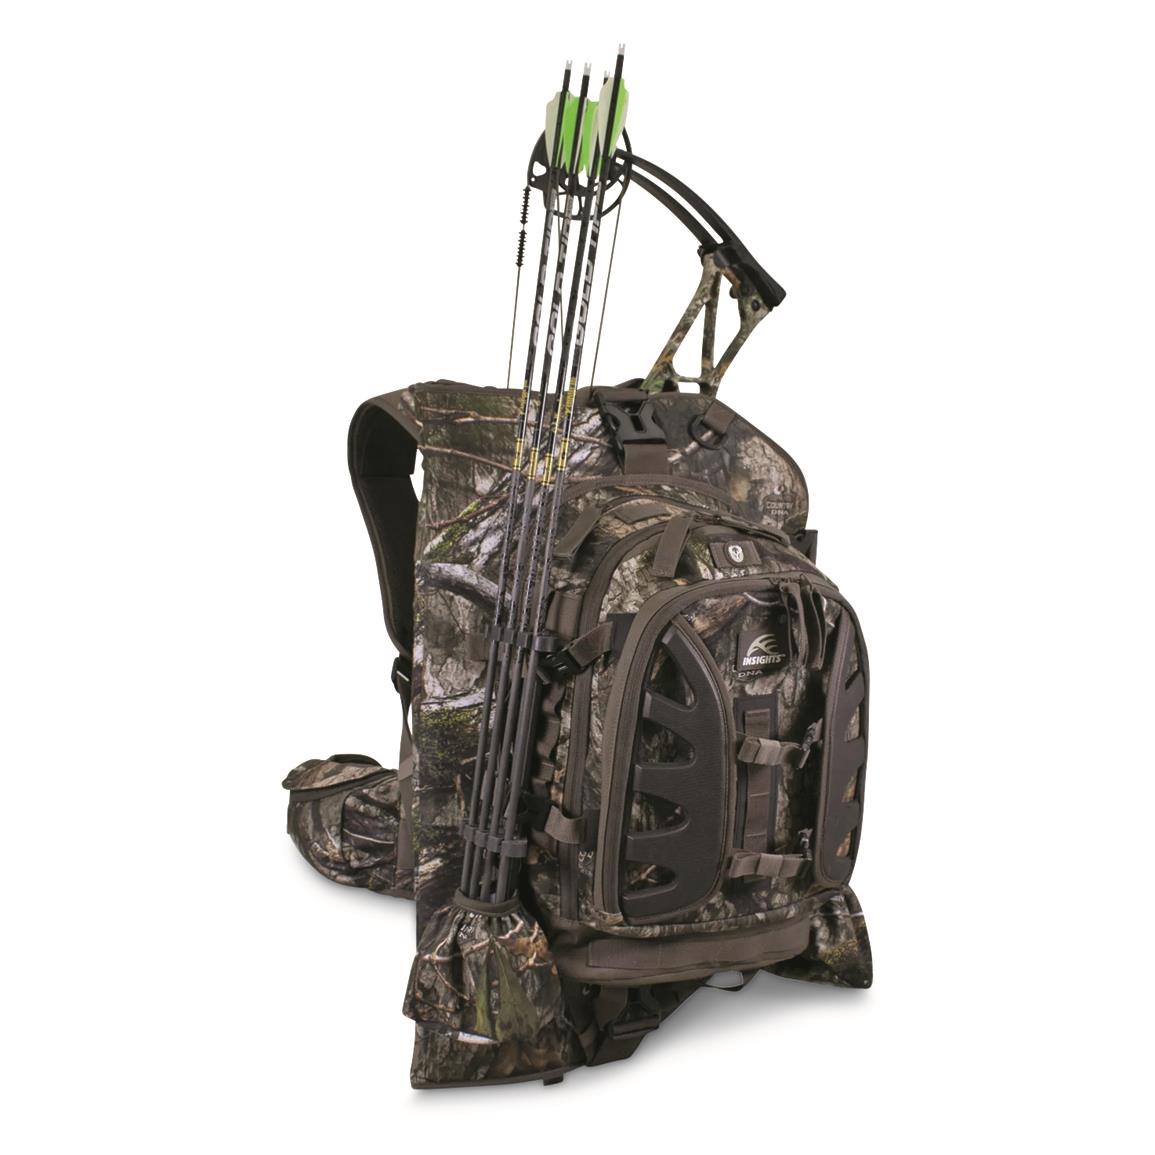 Compound Bows for Sale | Sportsman's Guide